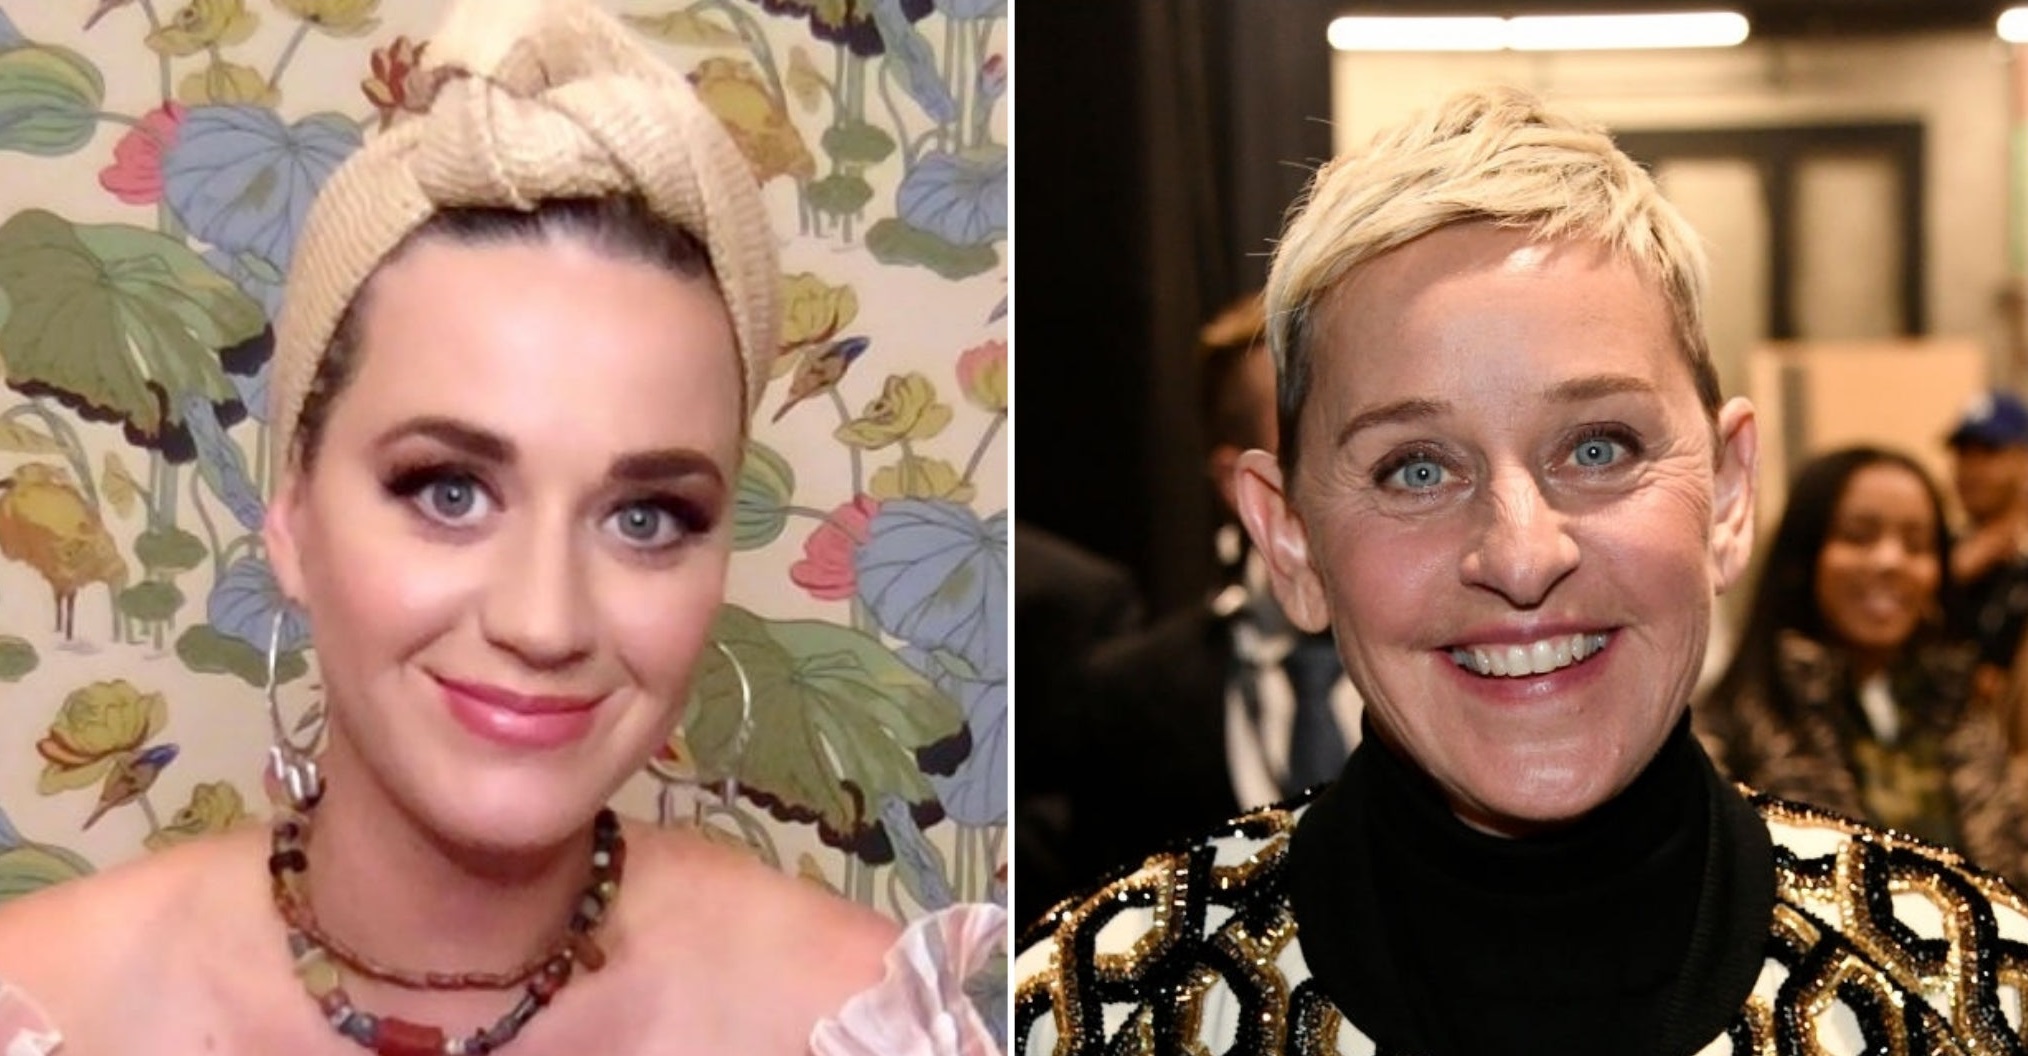 Katy Perry Reminds The World Of Ellen’s “Light & continual fight for equality”, While Extending Support Amidst Talkshow Drama